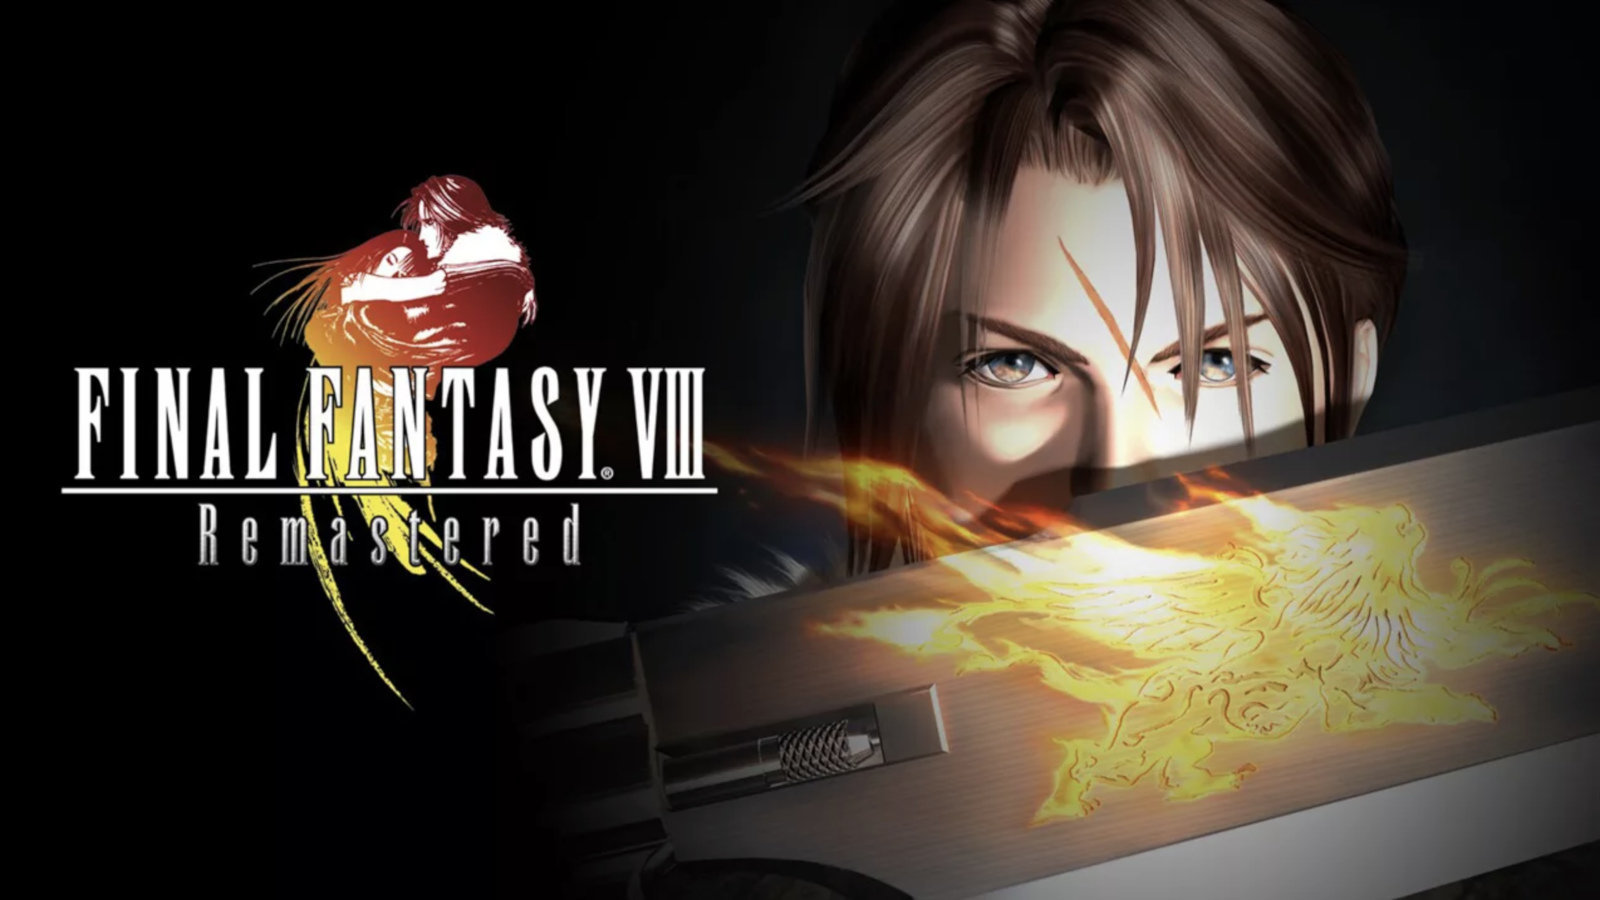 Final Fantasy Viii Remastered Is Ing Out On September 3rd